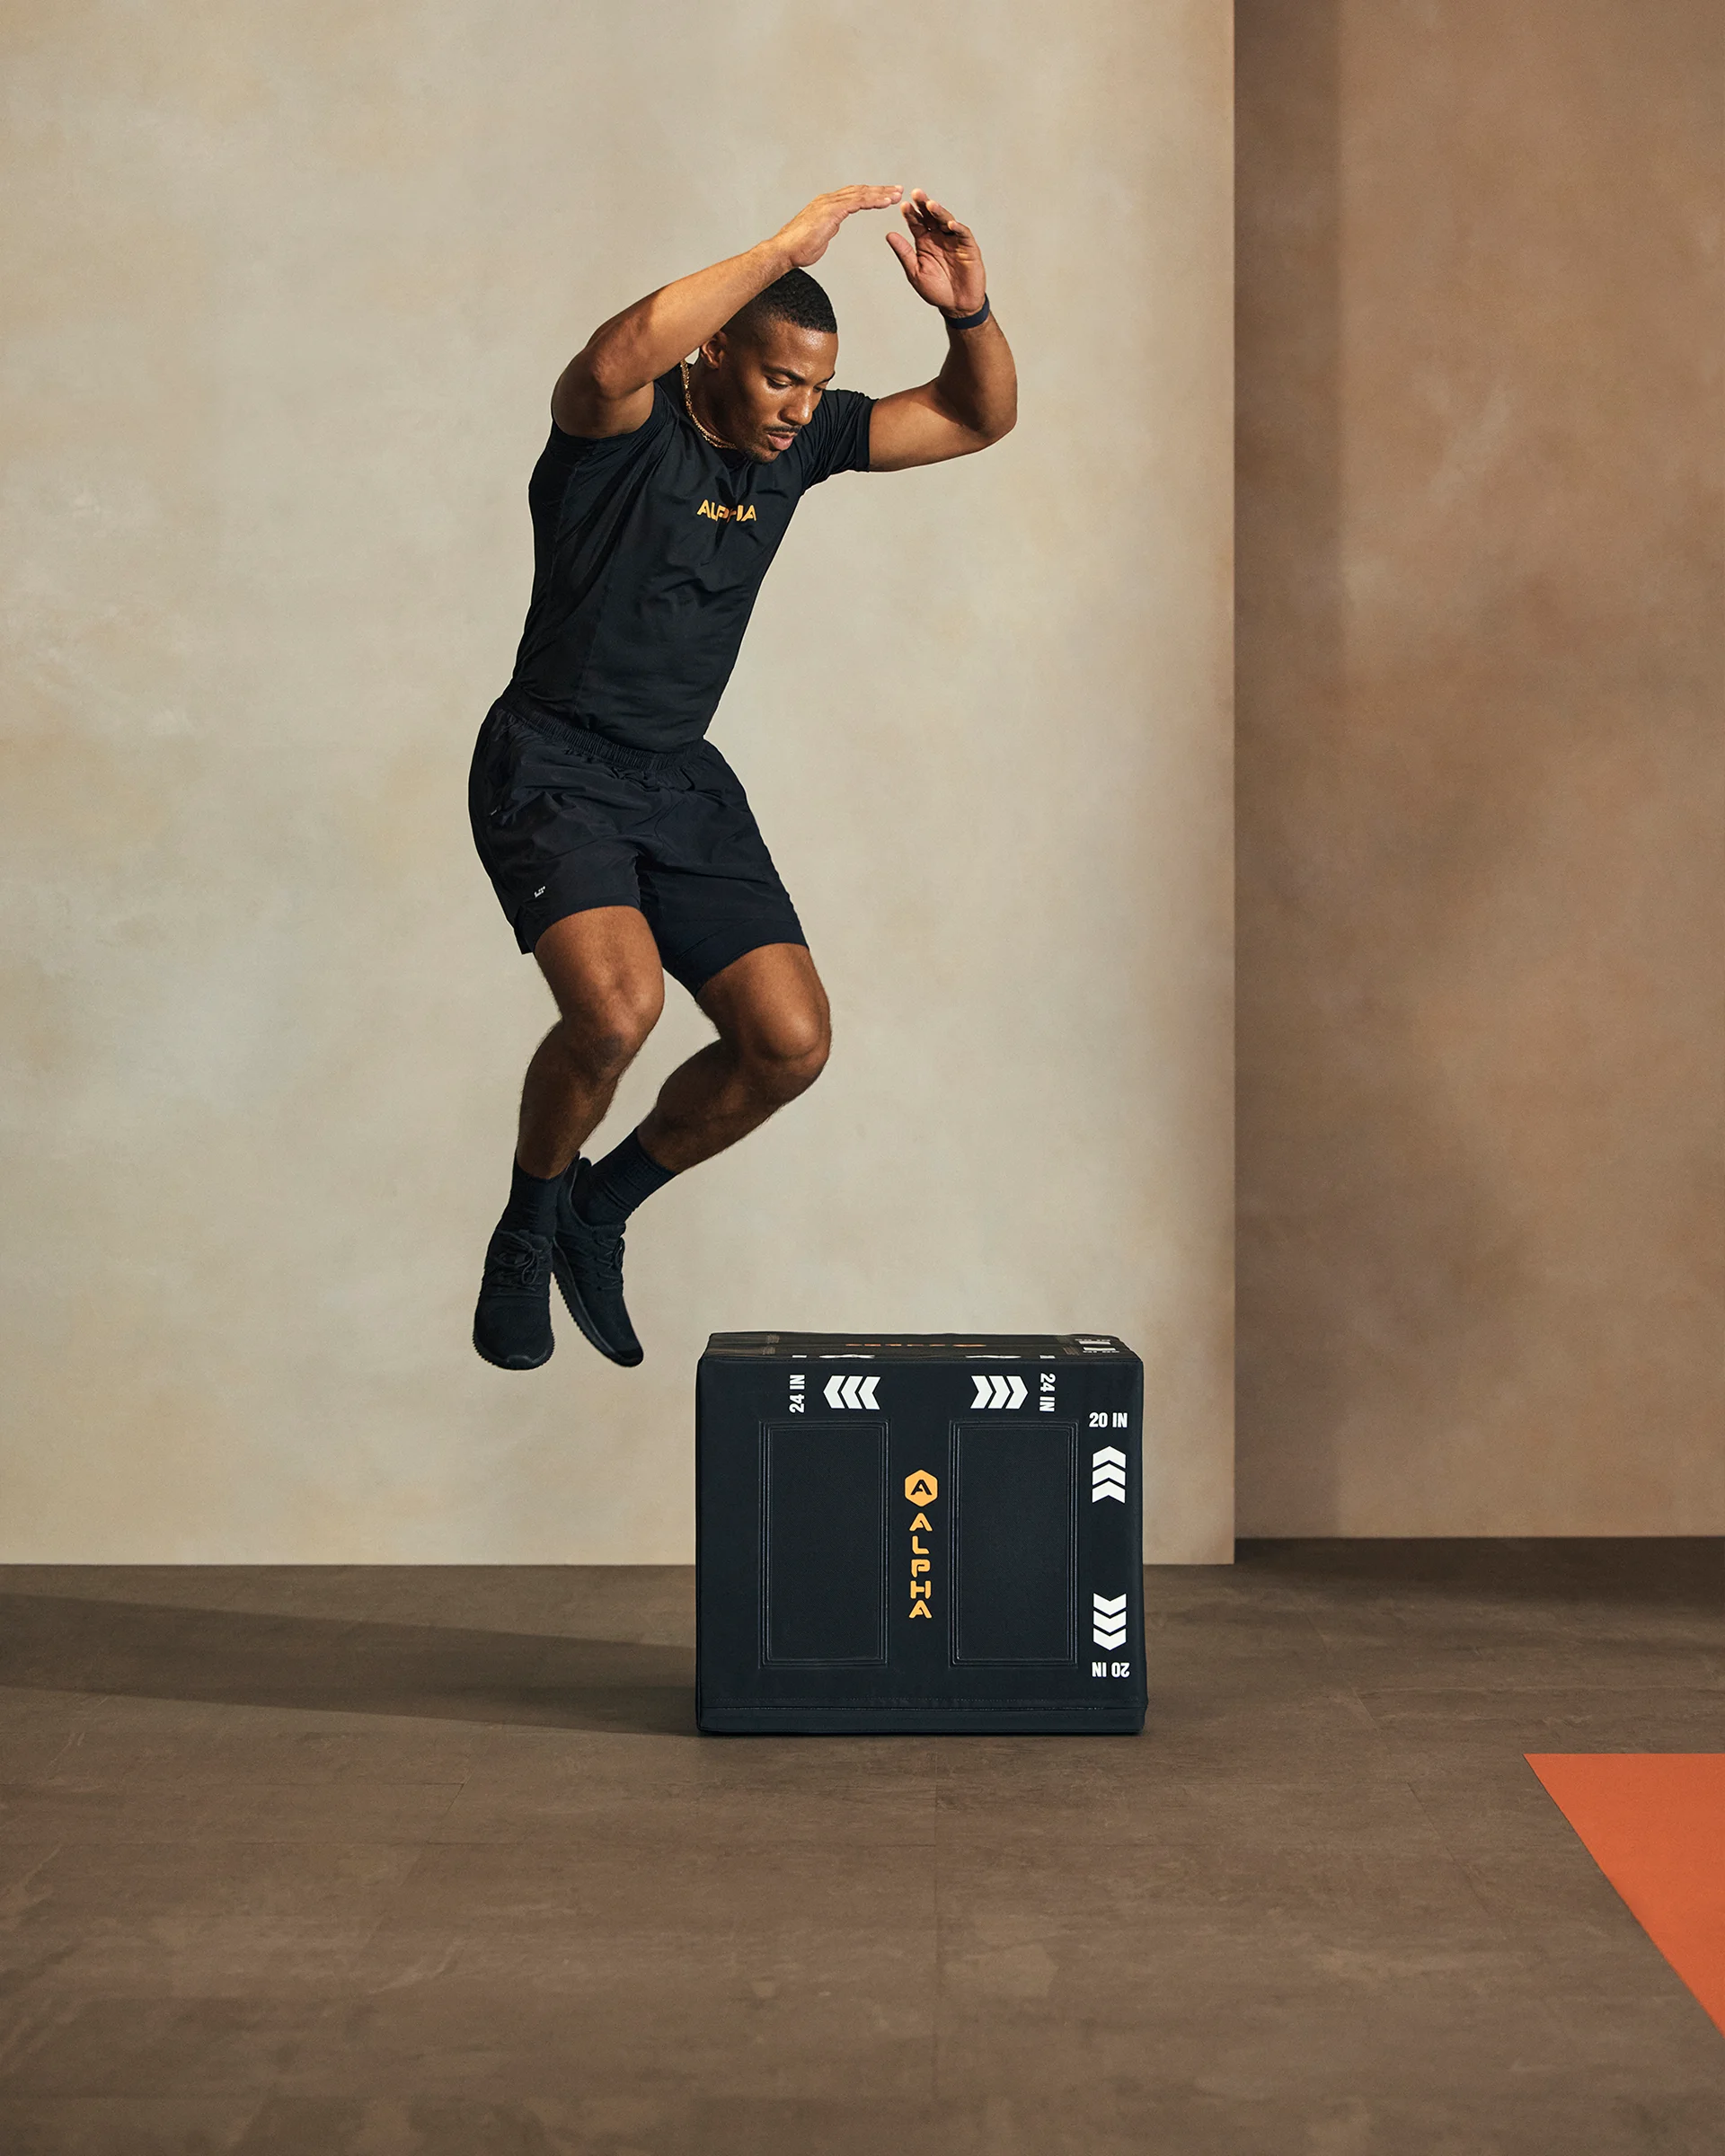 A Life Time member jumping off a plyo box in an Alpha class.